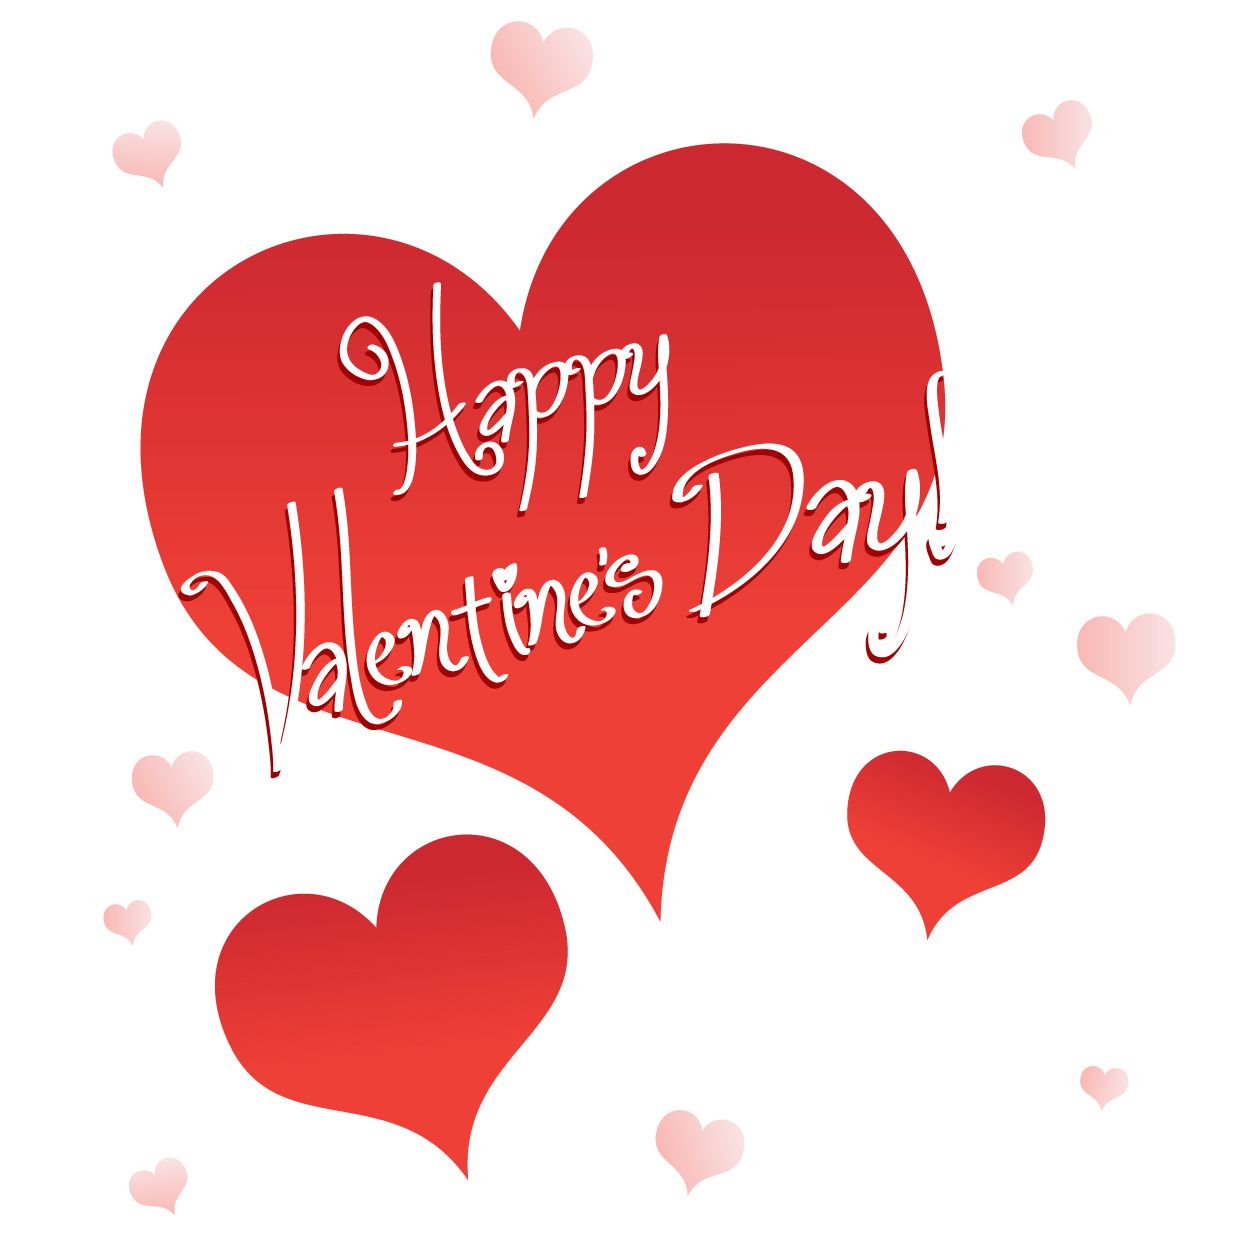 Clip art picture of a large red heart with the words "Happy Valentine's Day" written out in white. Two smaller red hearts below and faint pink hearts around. 